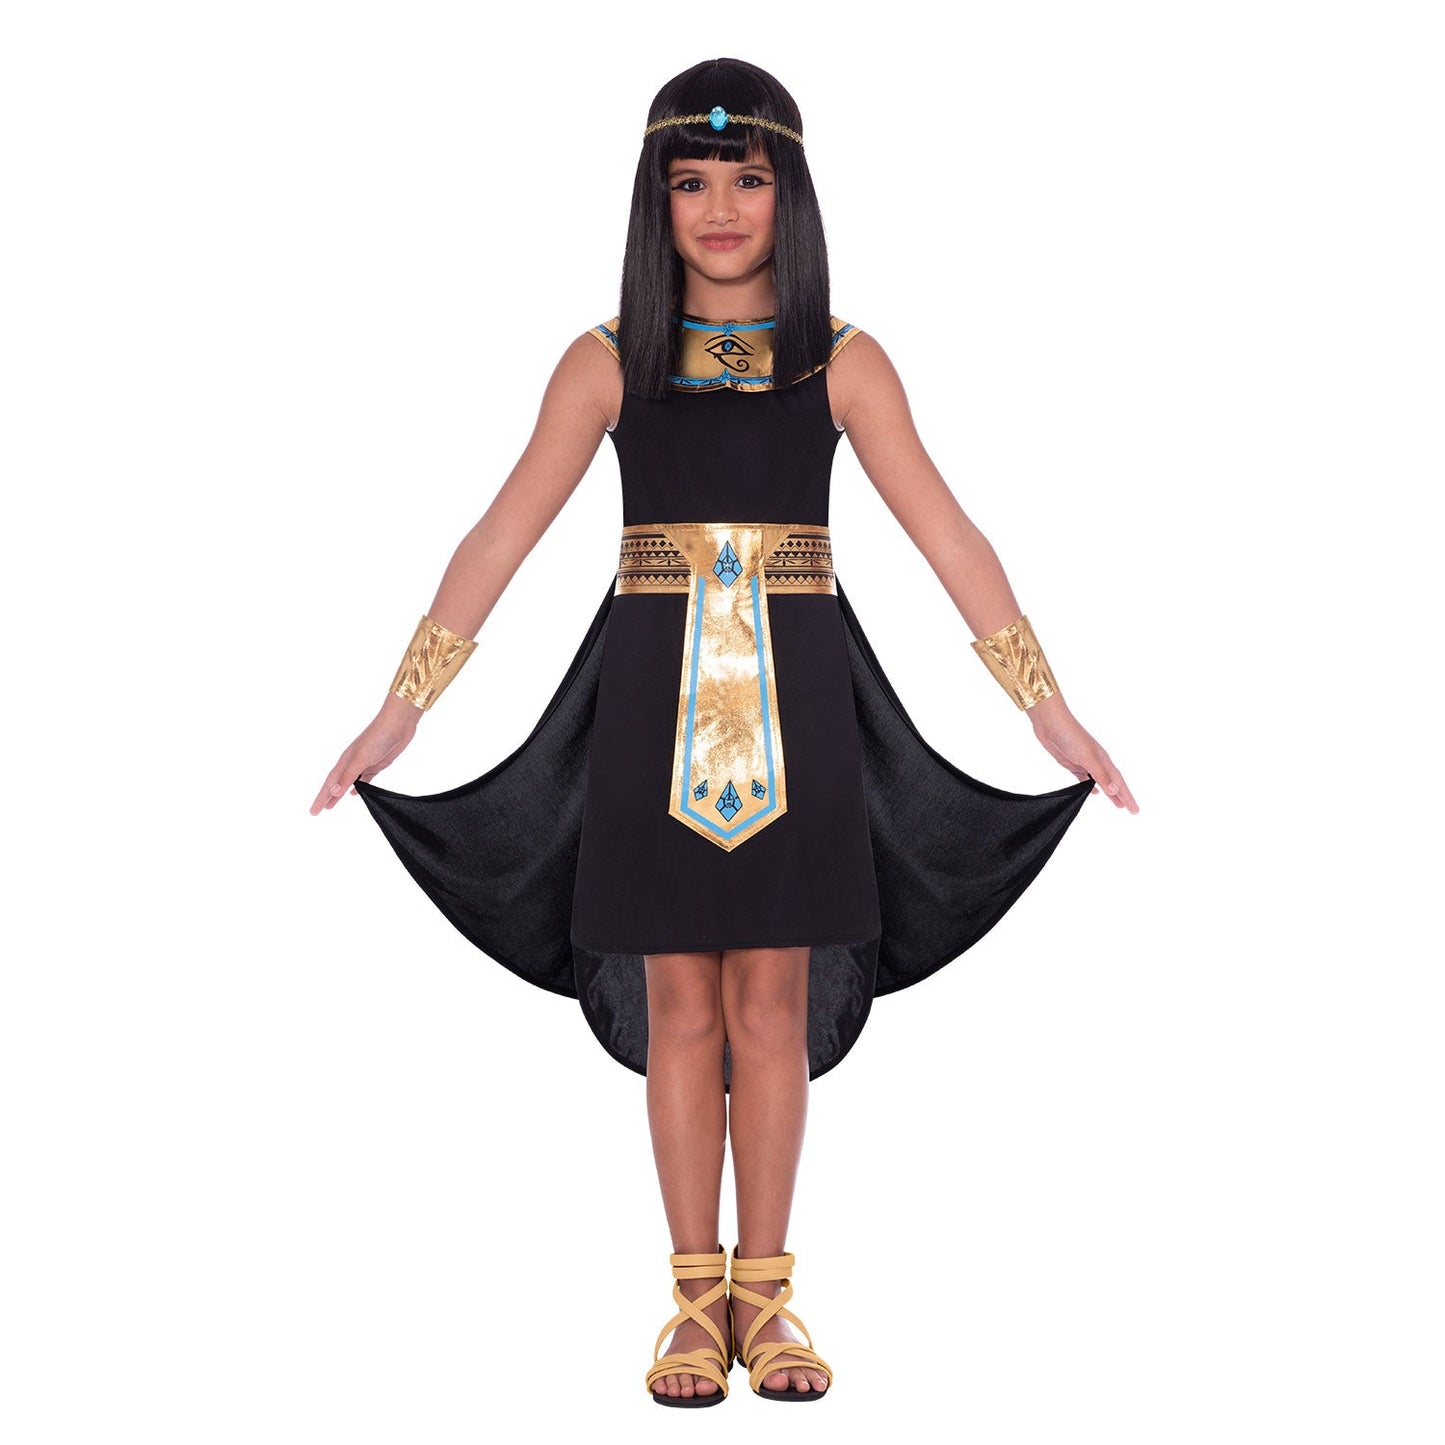 Egyptian Pharaoh Girl Costume includes dress, collar, headpiece, cuffs and belt